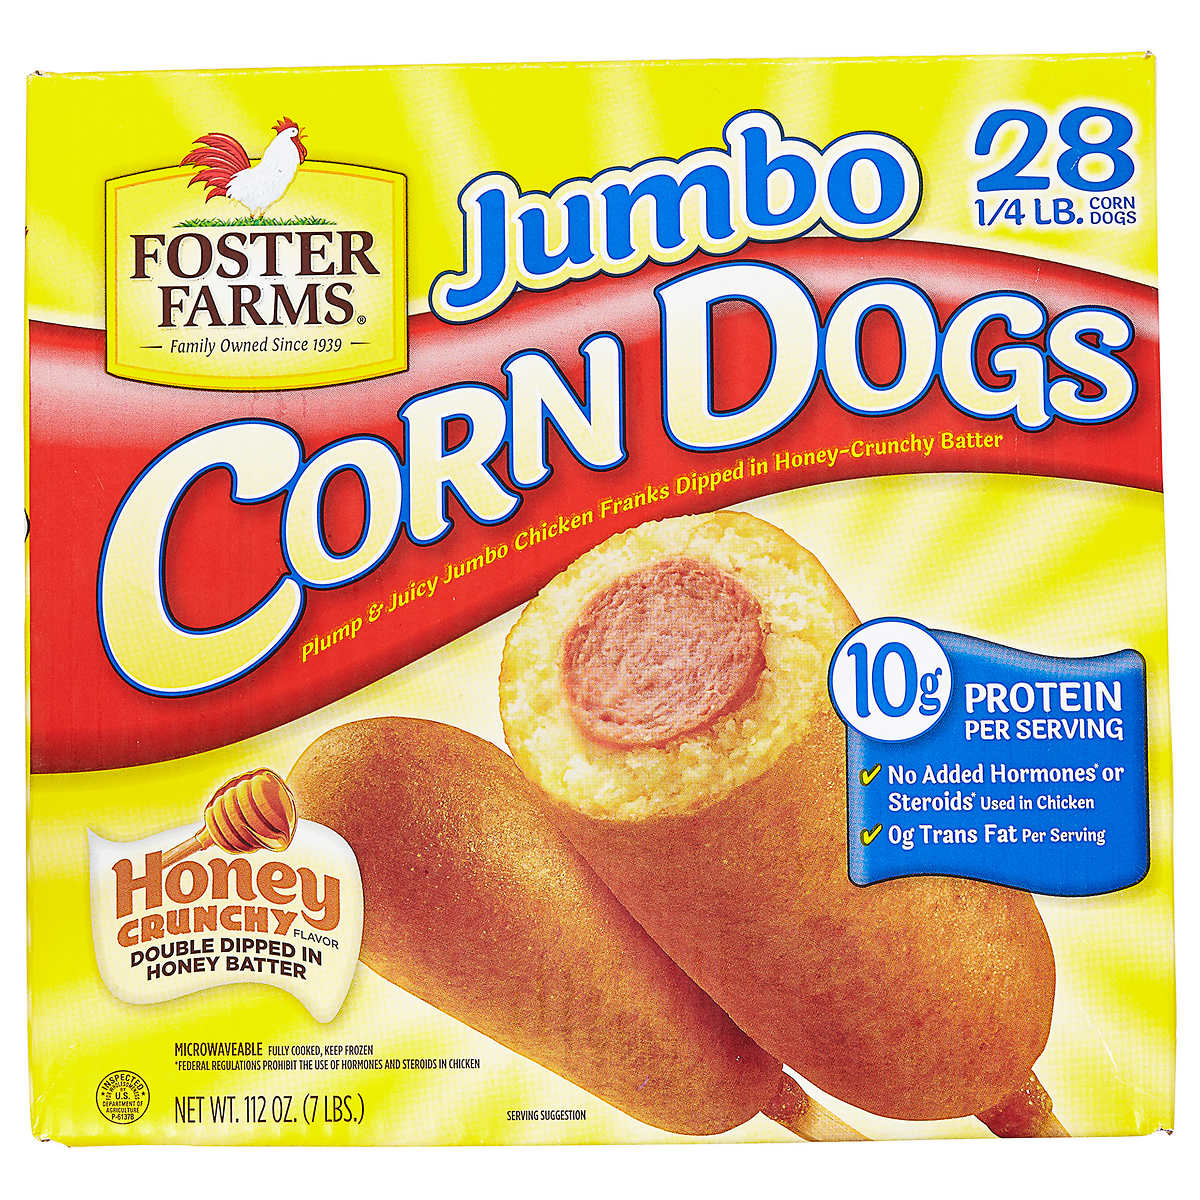 CORN DOGS HAND DIPPED Advertising Vinyl Banner Flag Sign Many Sizes 